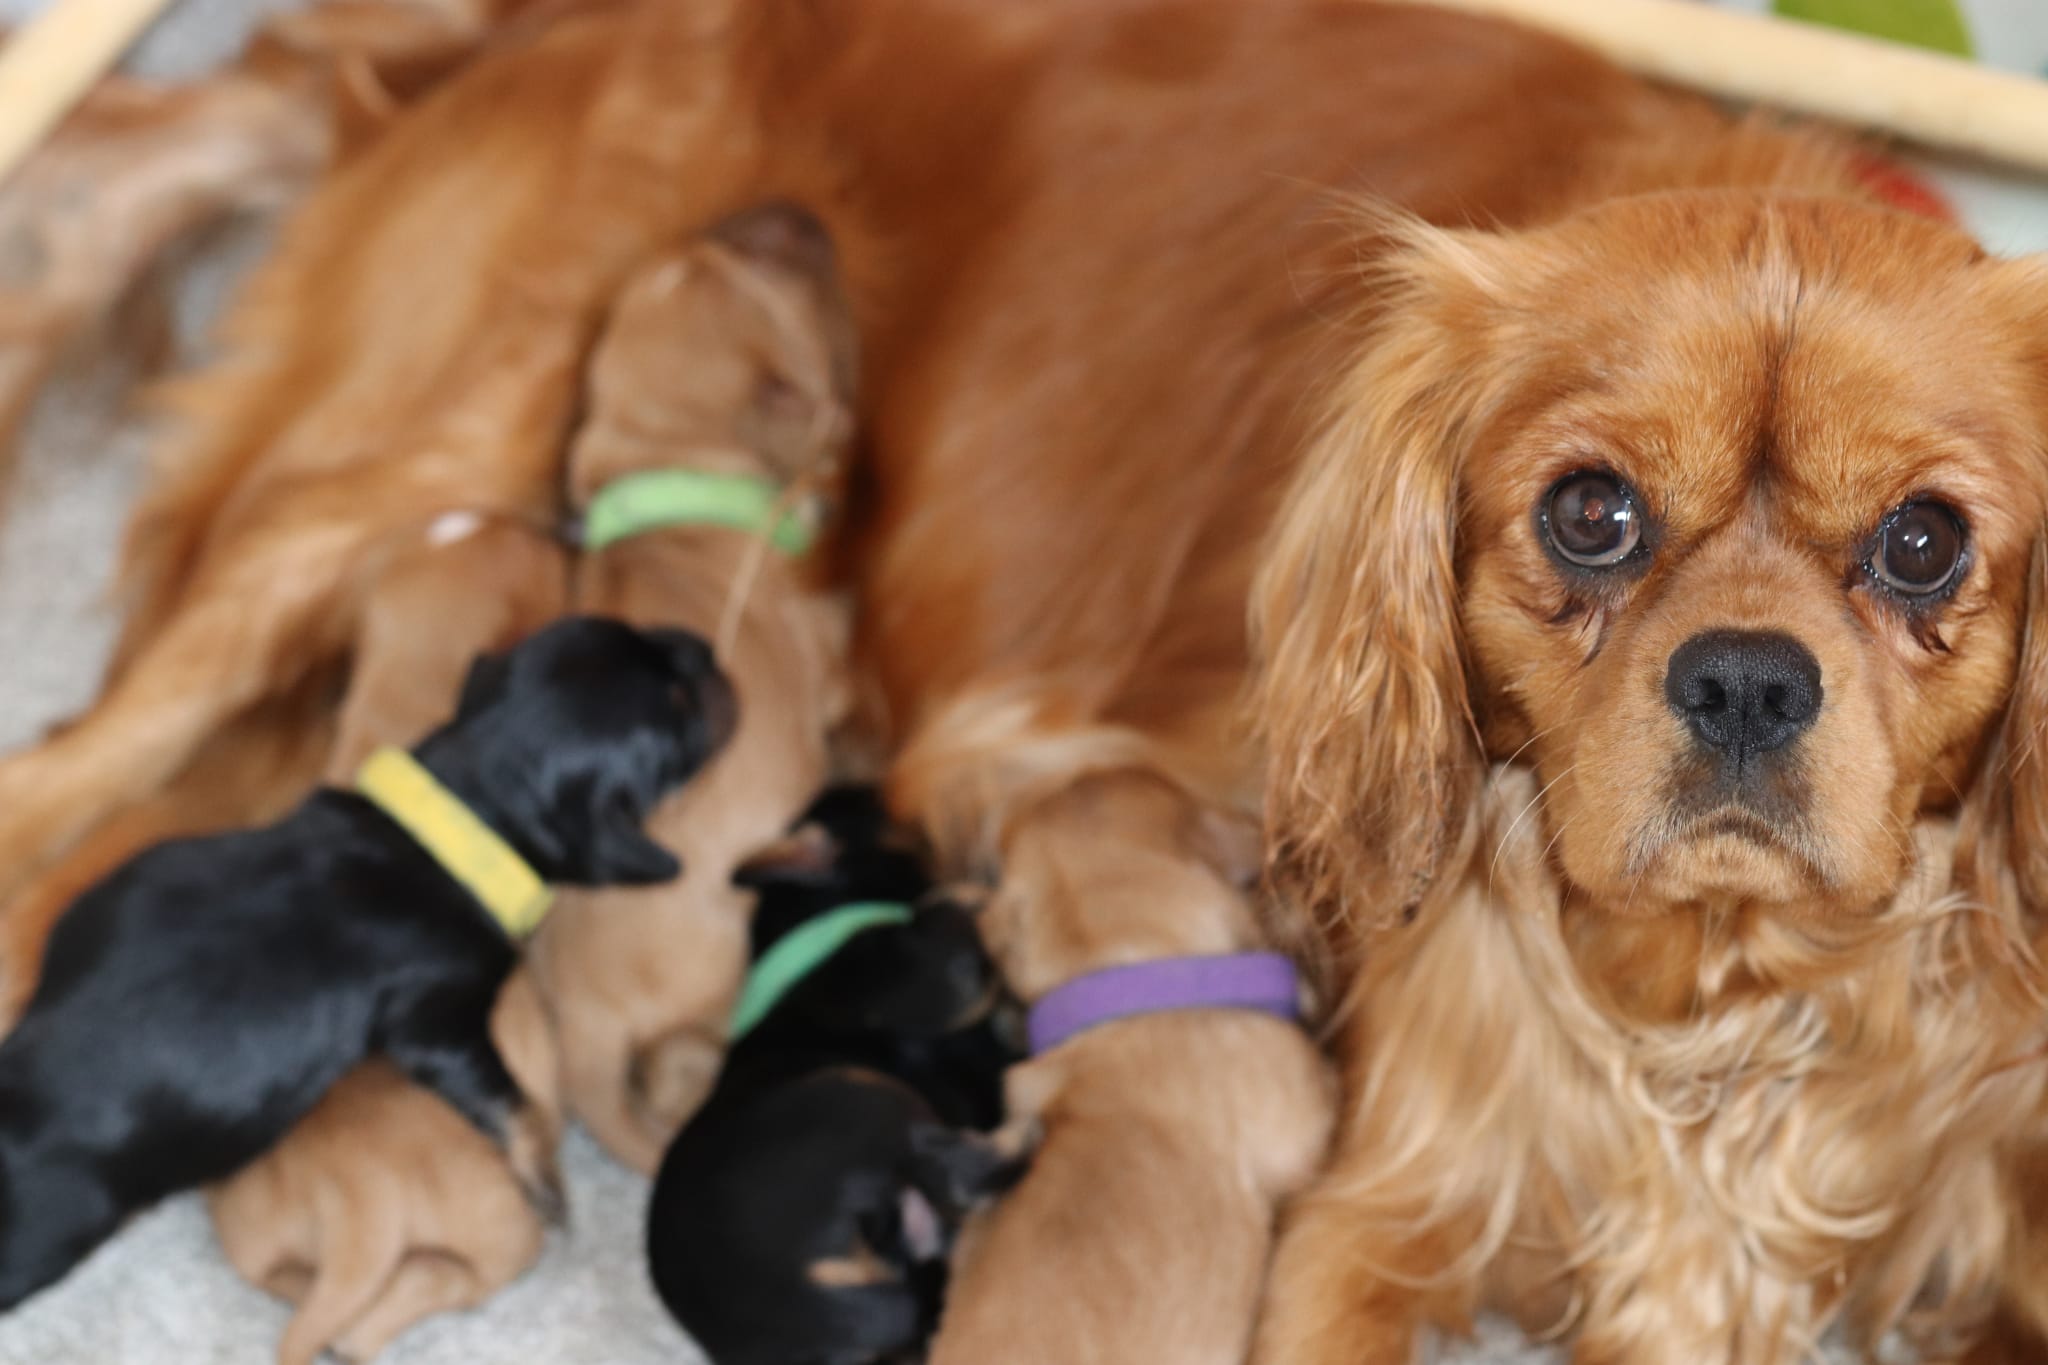 Mum with her puppies